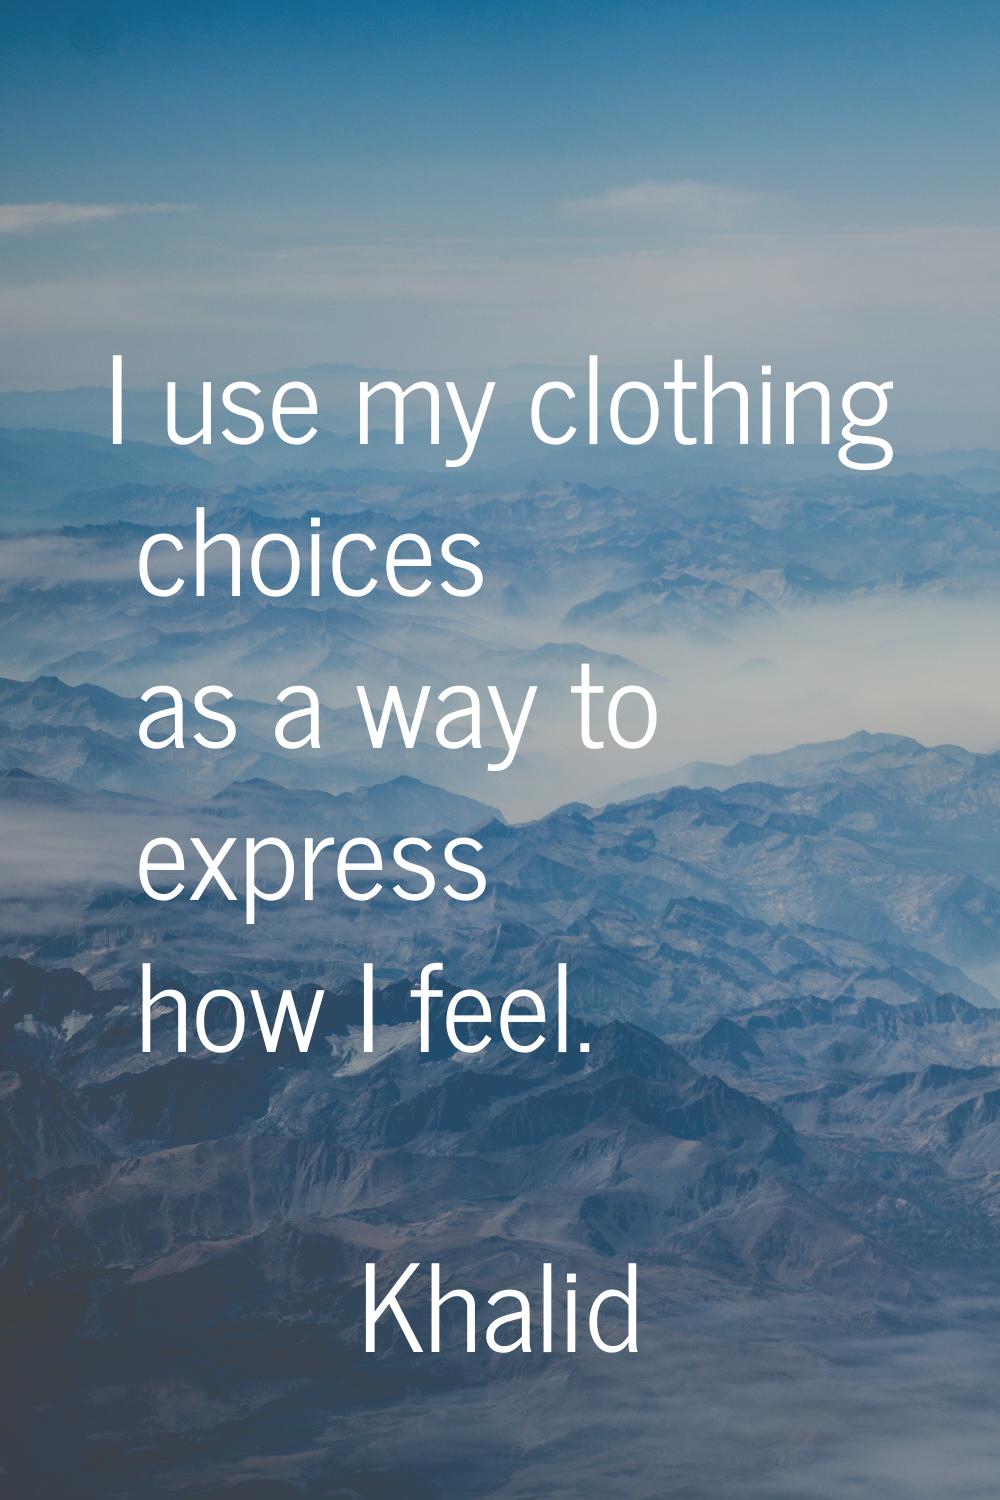 I use my clothing choices as a way to express how I feel.